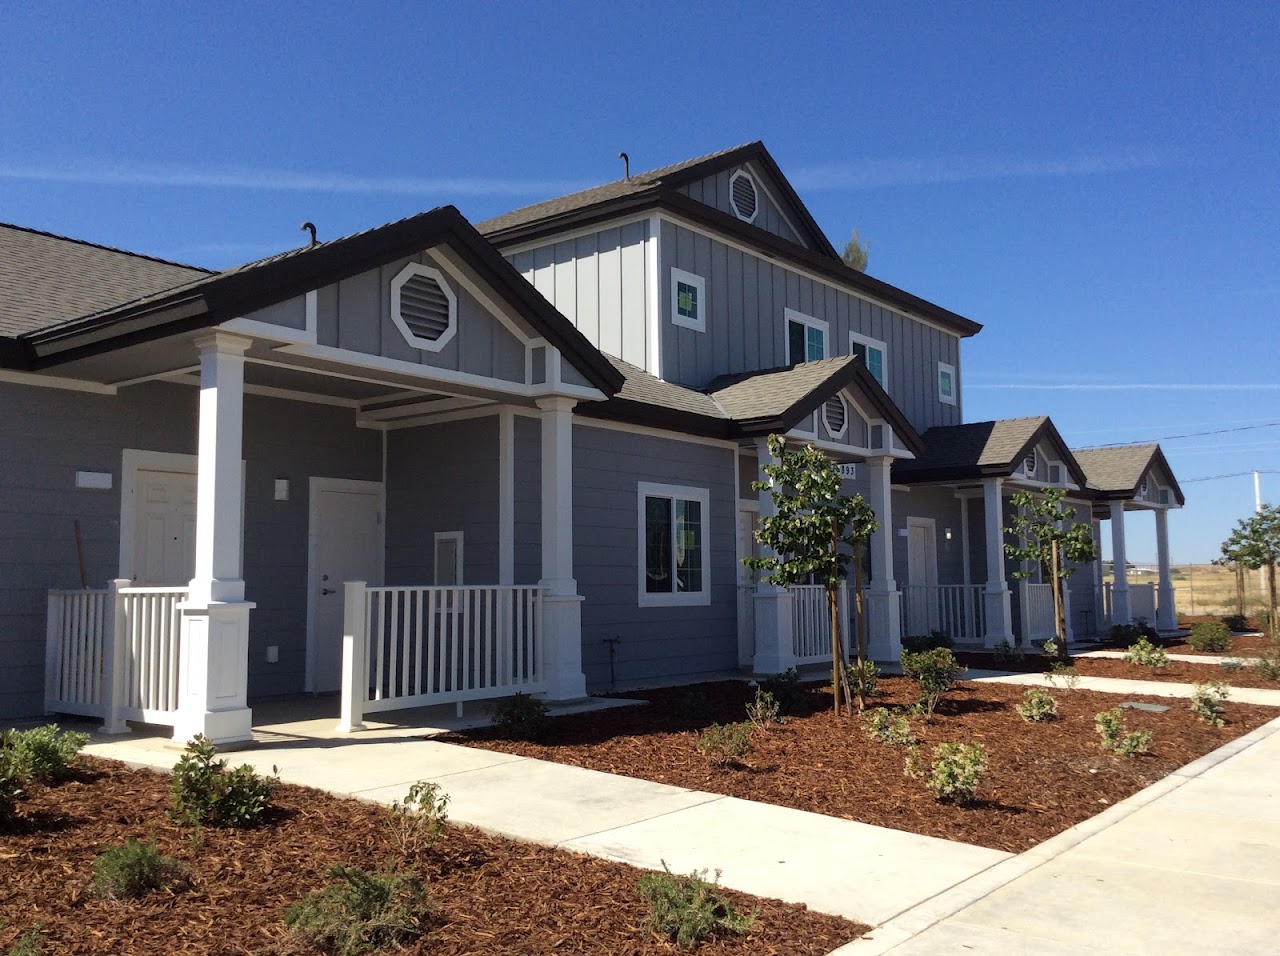 Photo of ALMOND VILLAGE. Affordable housing located at 14869 LAMBERSON AVENUE LOST HILLS, CA 93249